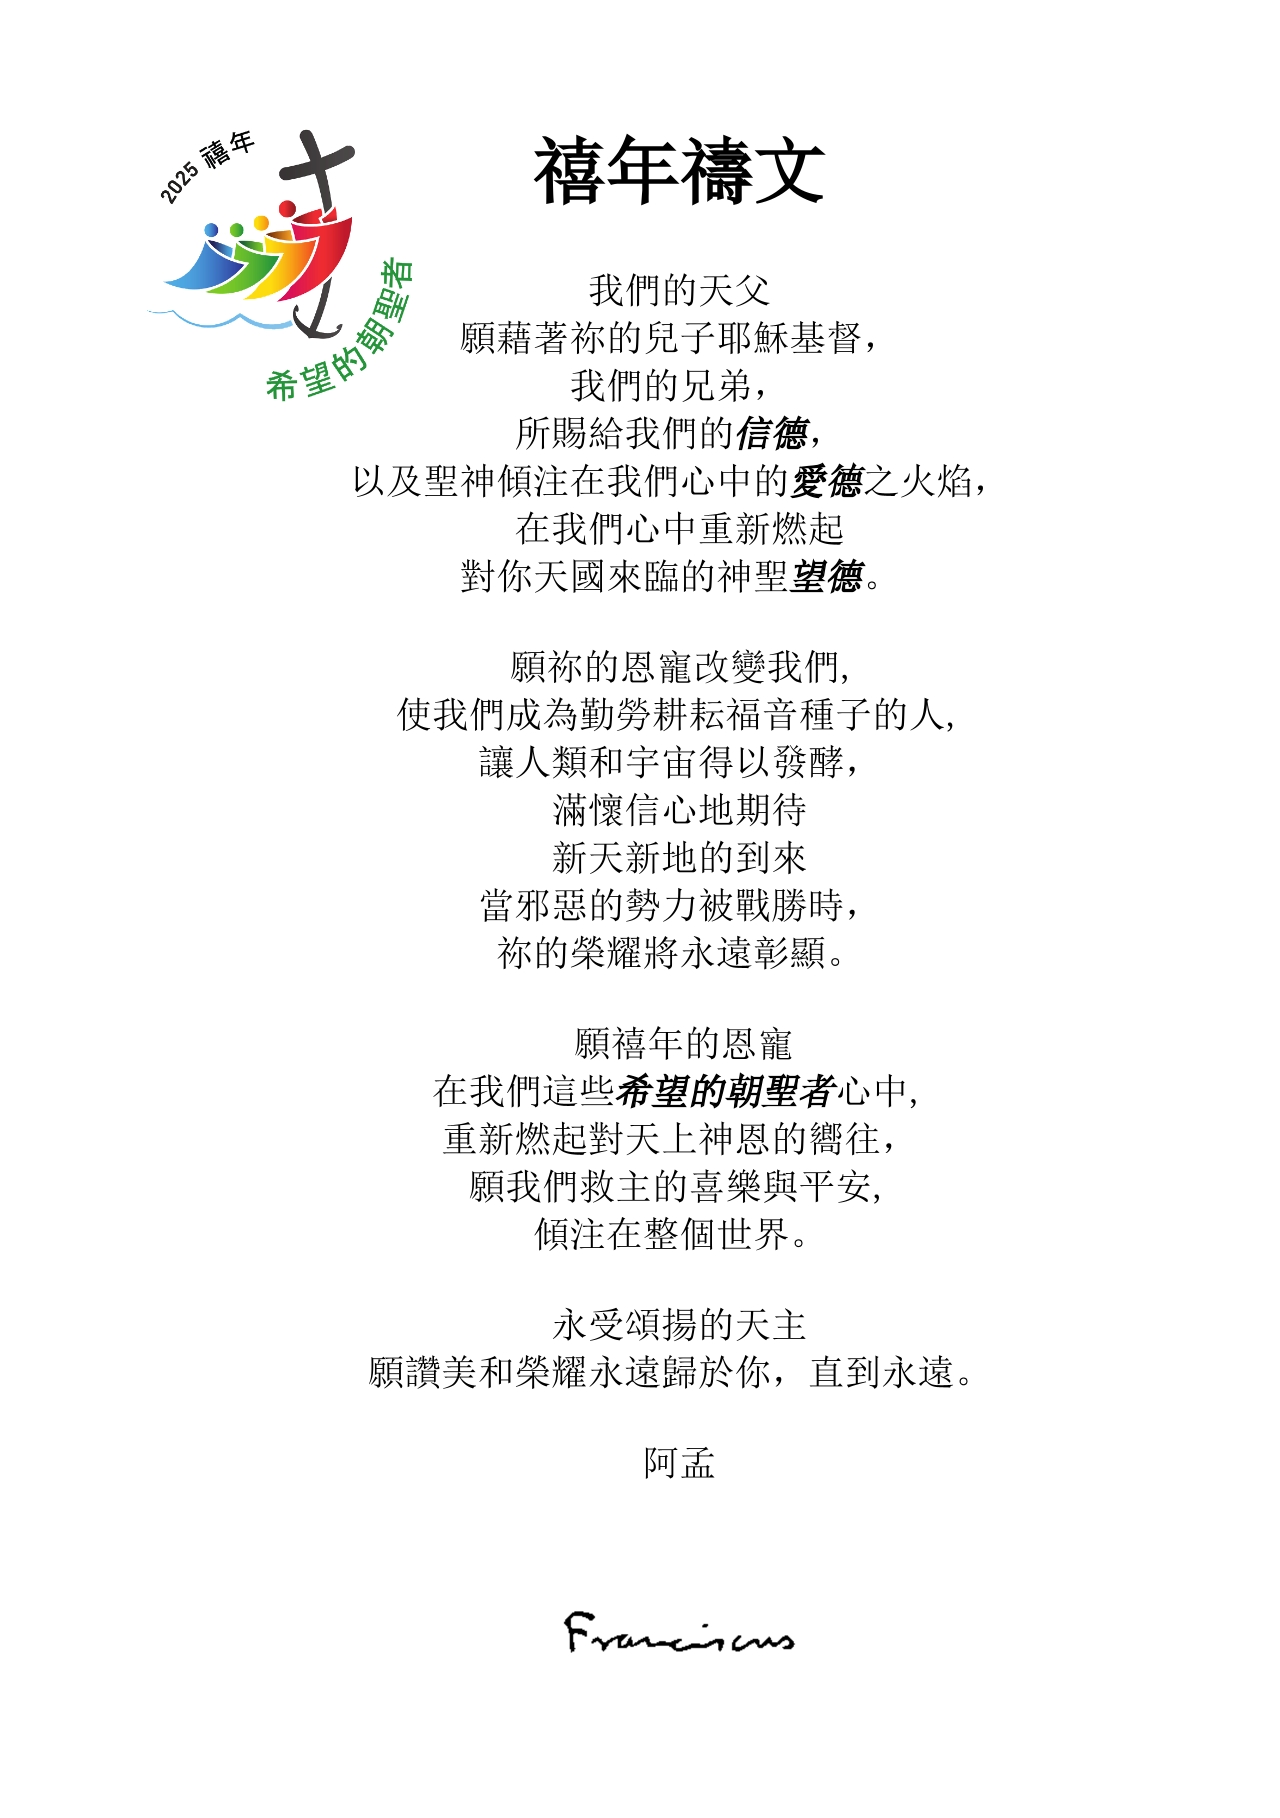 The Jubilee Prayer - traditional Chinese